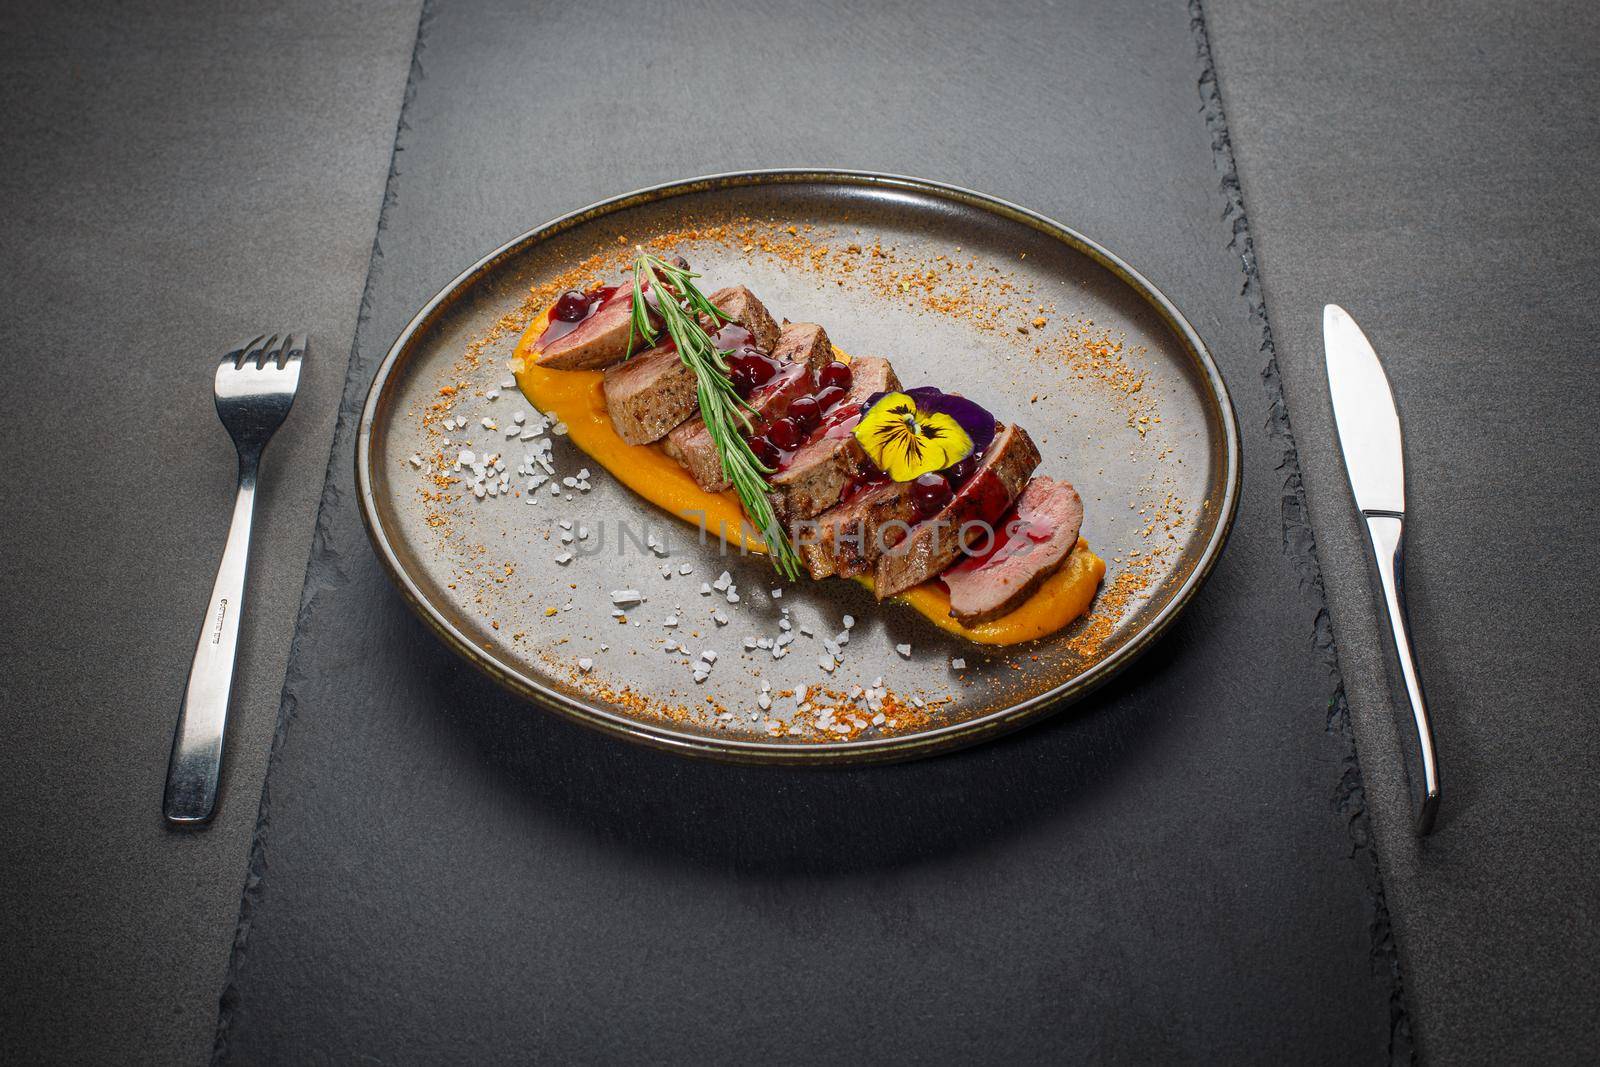 Glazed pork fillet with pumpkin puree and cranberry sauce on a dark plate. Sliced pork tenderloin or sirloin decorated with rosmarin and edible flowers.